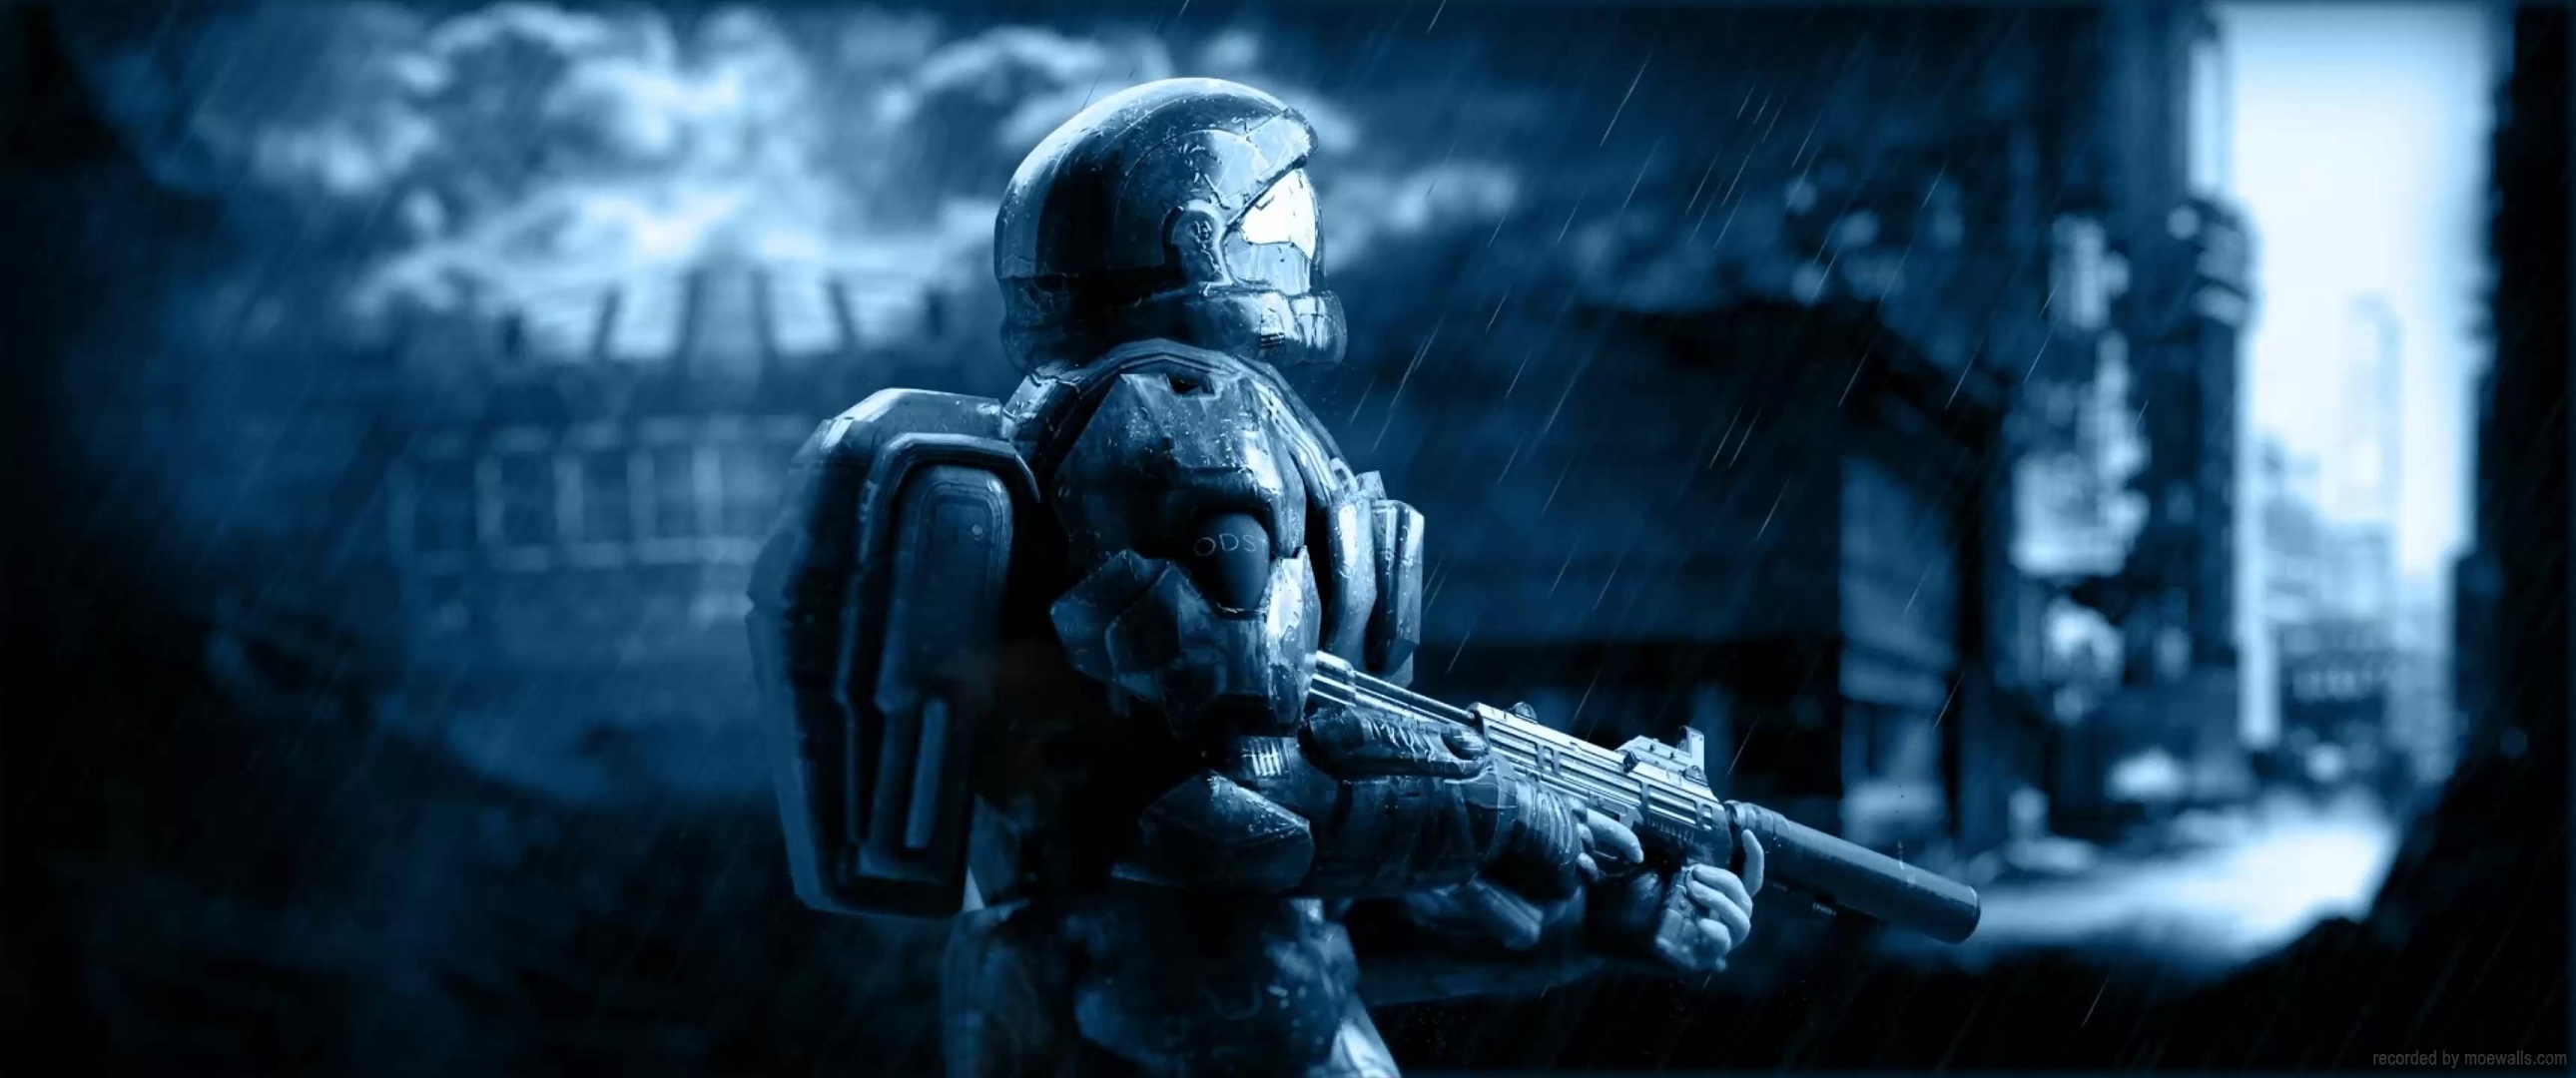 Halo 3 ODST phone wallpaper 1080P 2k 4k Full HD Wallpapers Backgrounds  Free Download  Wallpaper Crafter